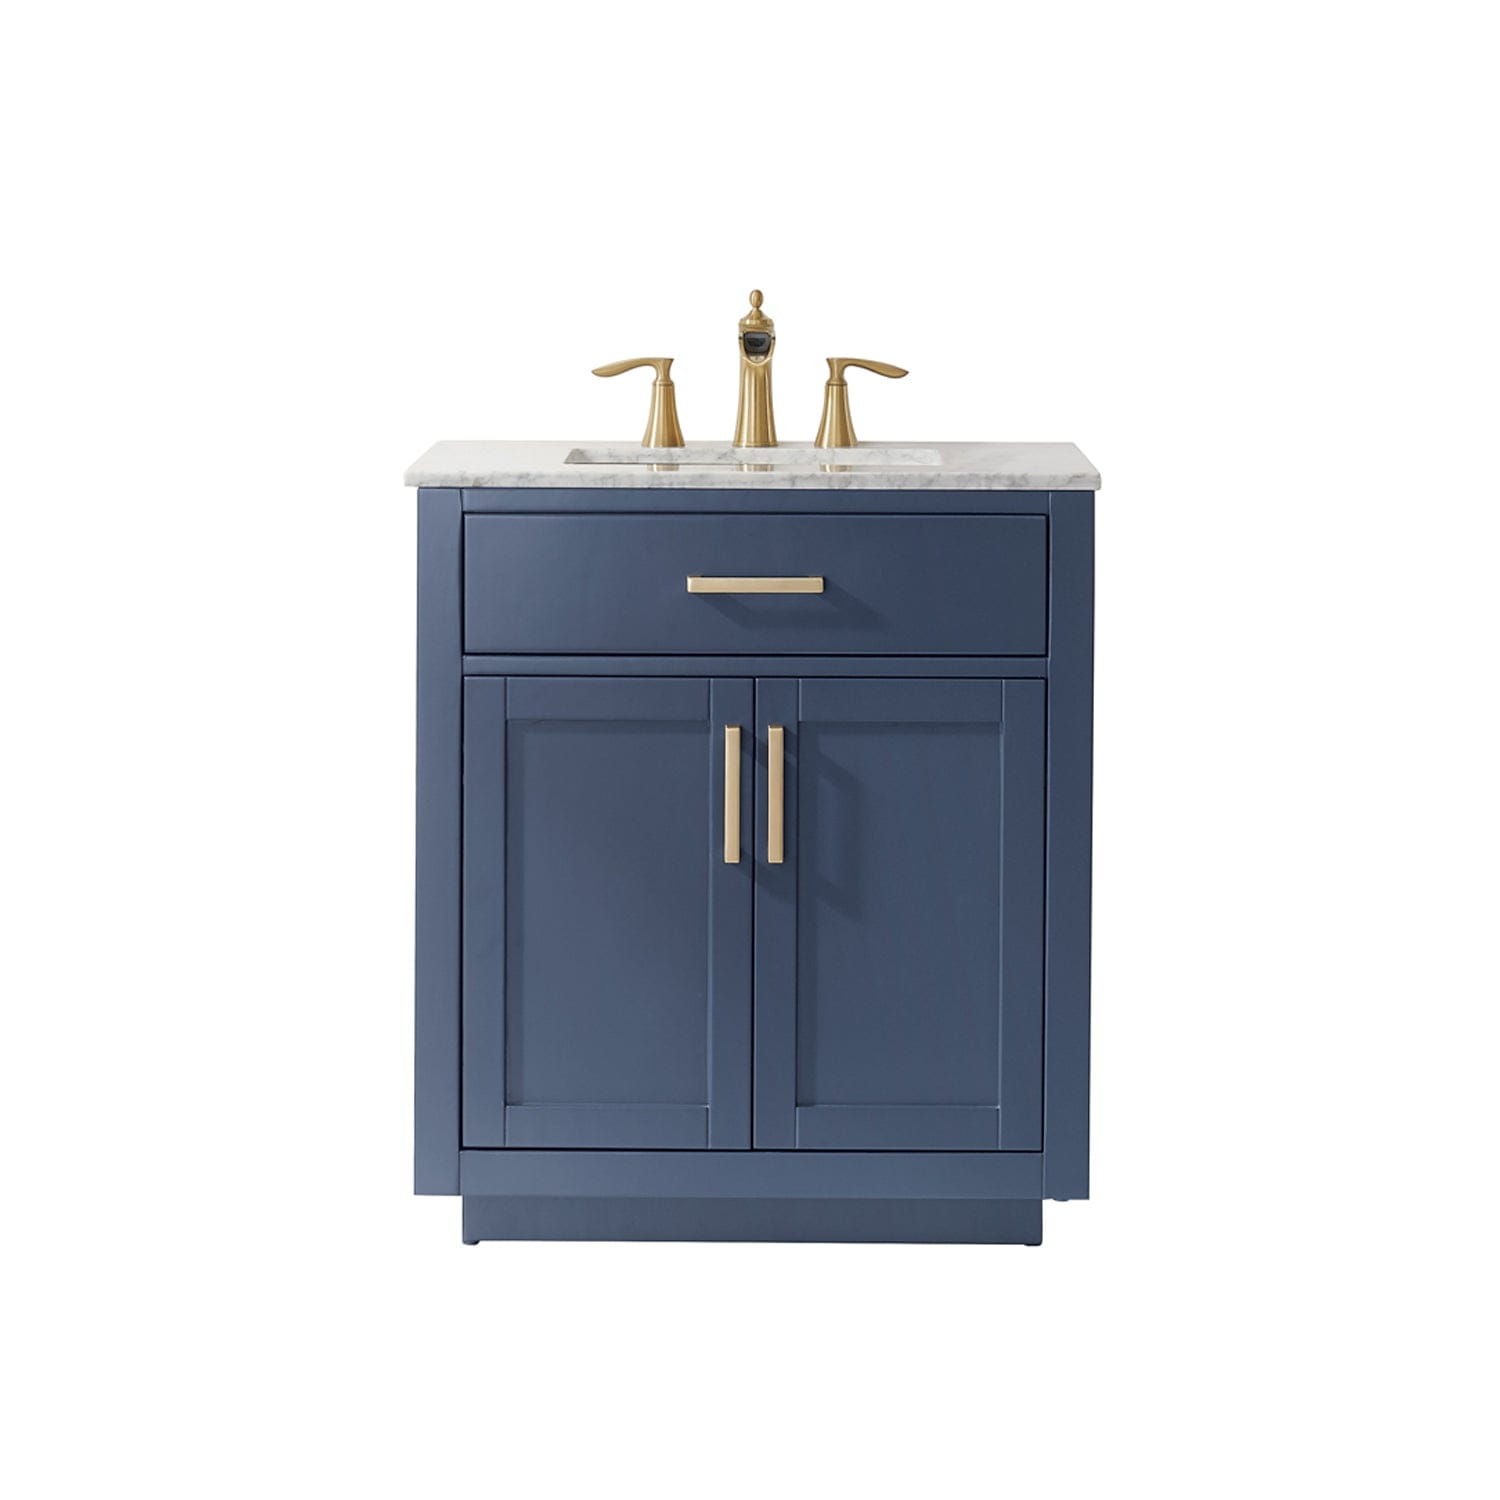 Altair Ivy 30" Single Bathroom Vanity Set in Royal Blue and Carrara White Marble Countertop without Mirror 531030-RB-CA-NM - Molaix631112971065Vanity531030-RB-CA-NM